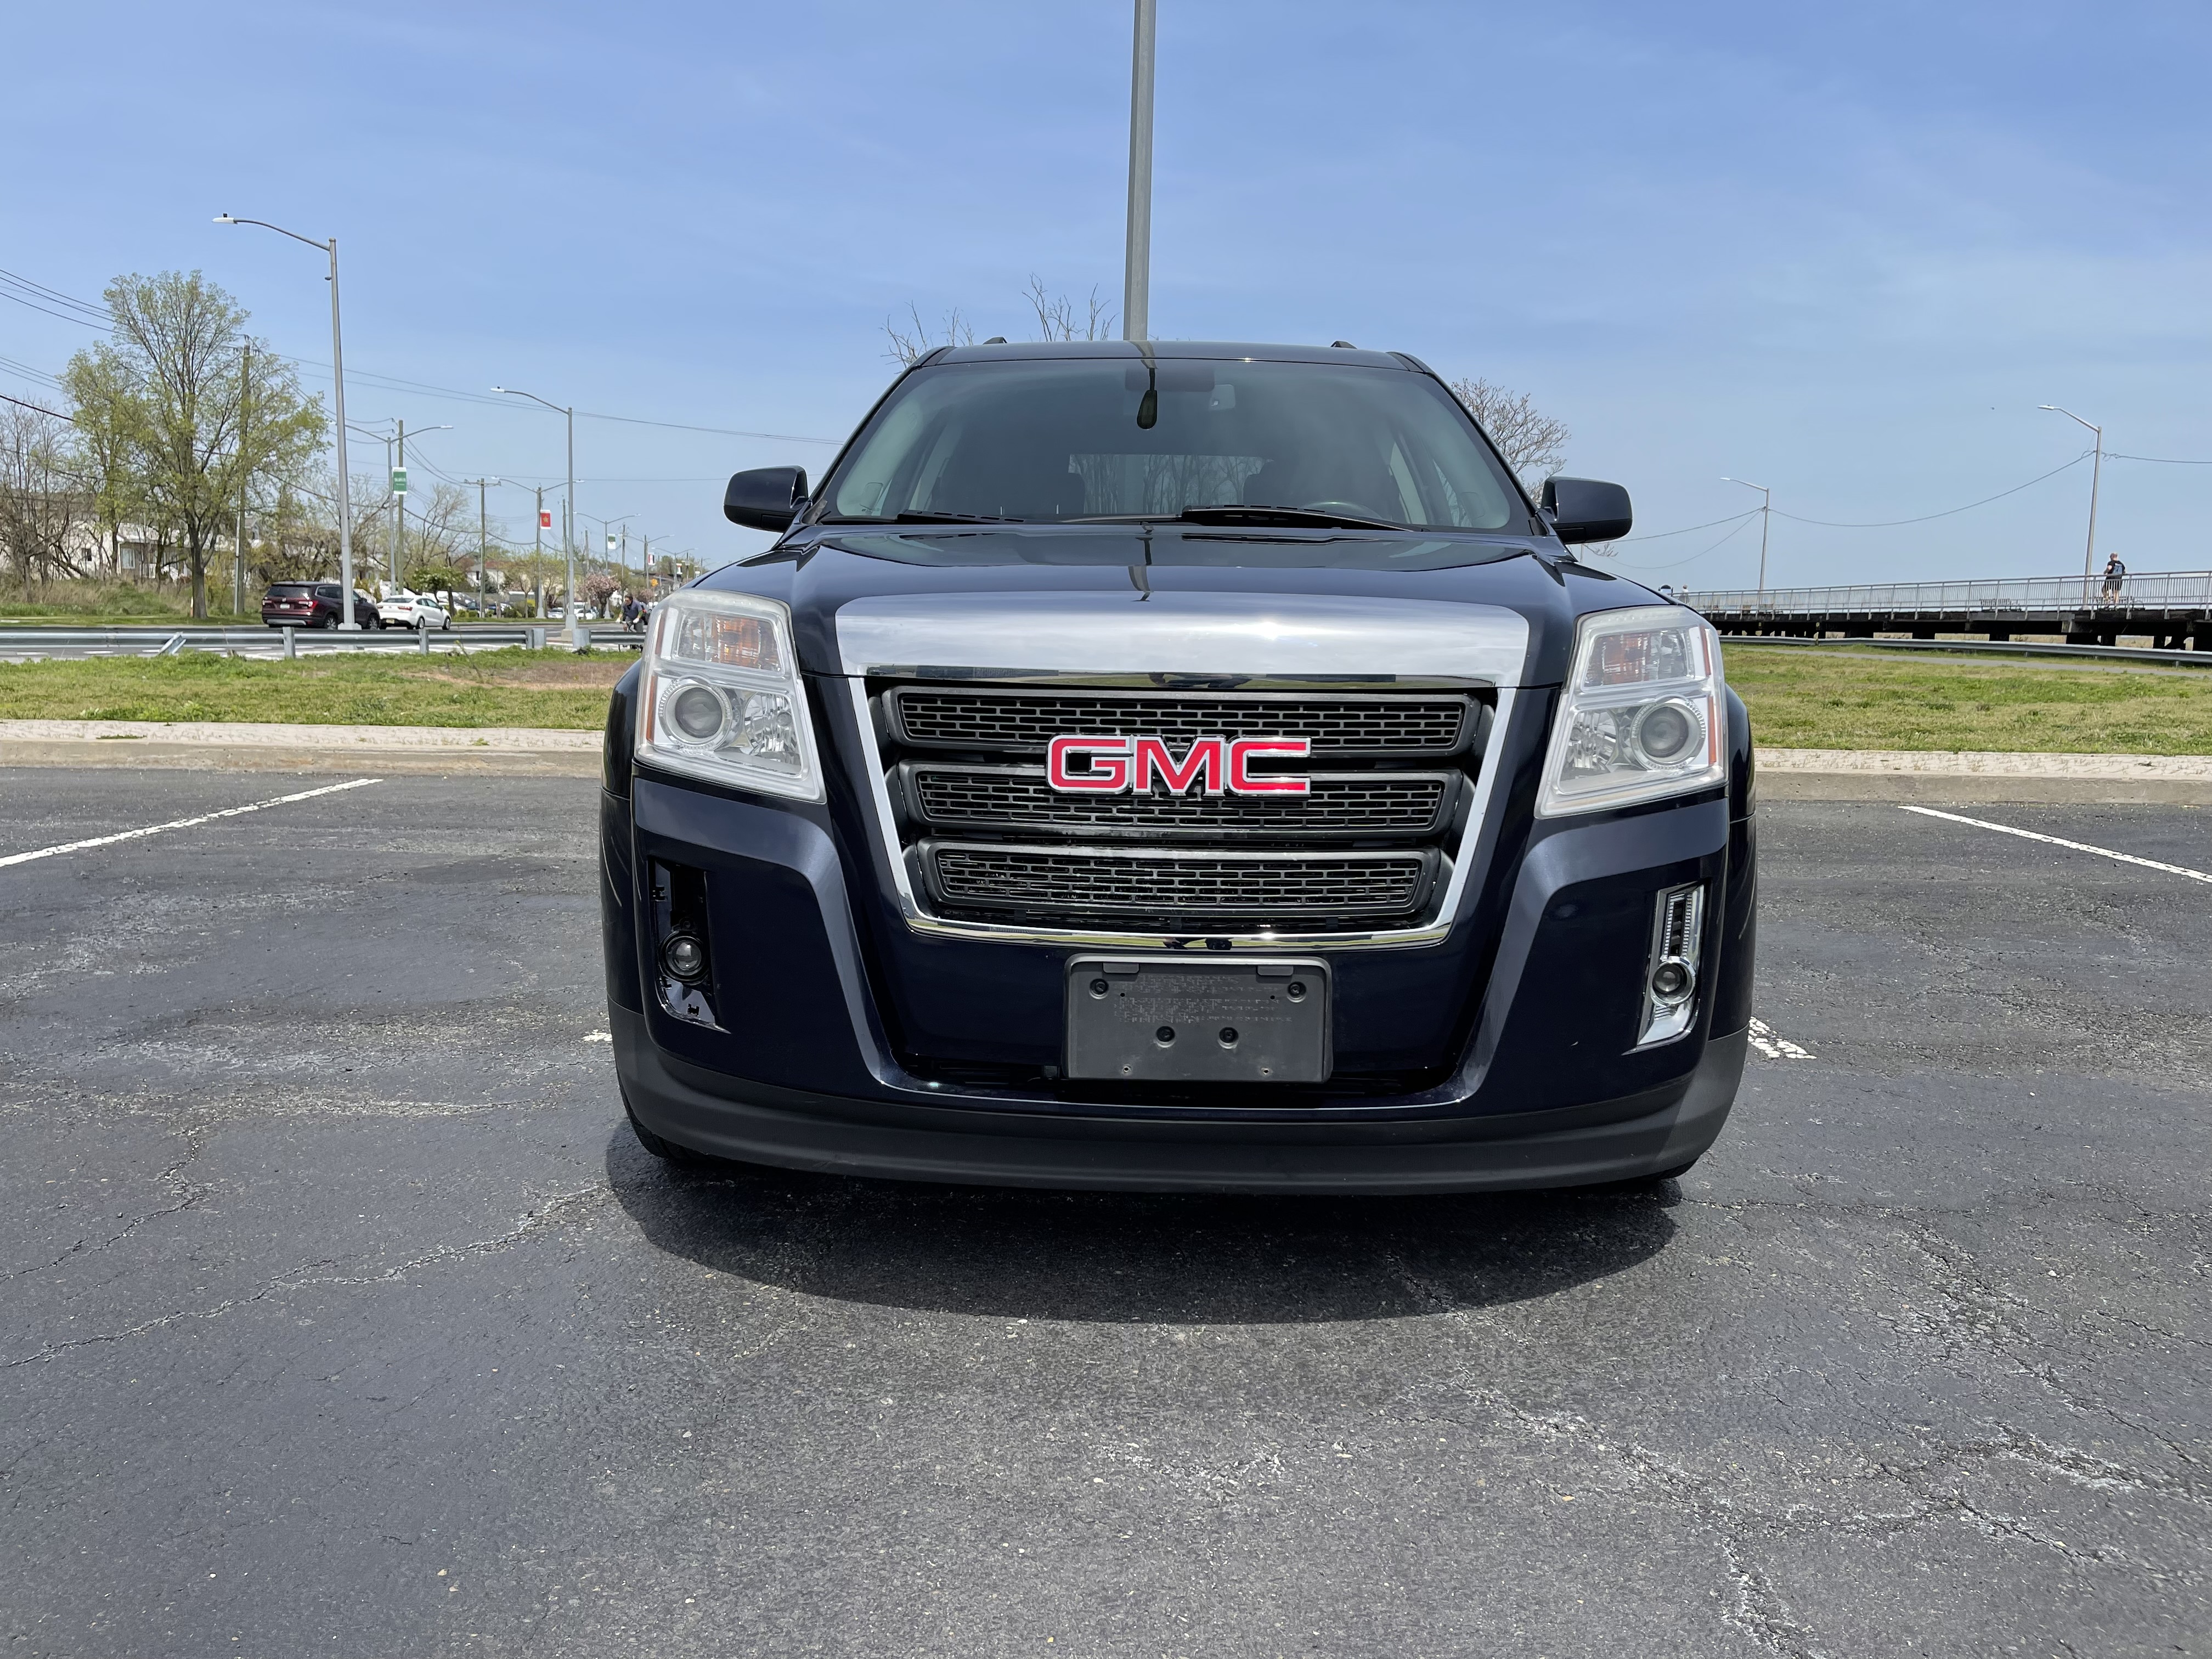 Used - GMC Terrain SLE 2 AWD SUV for sale in Staten Island NY